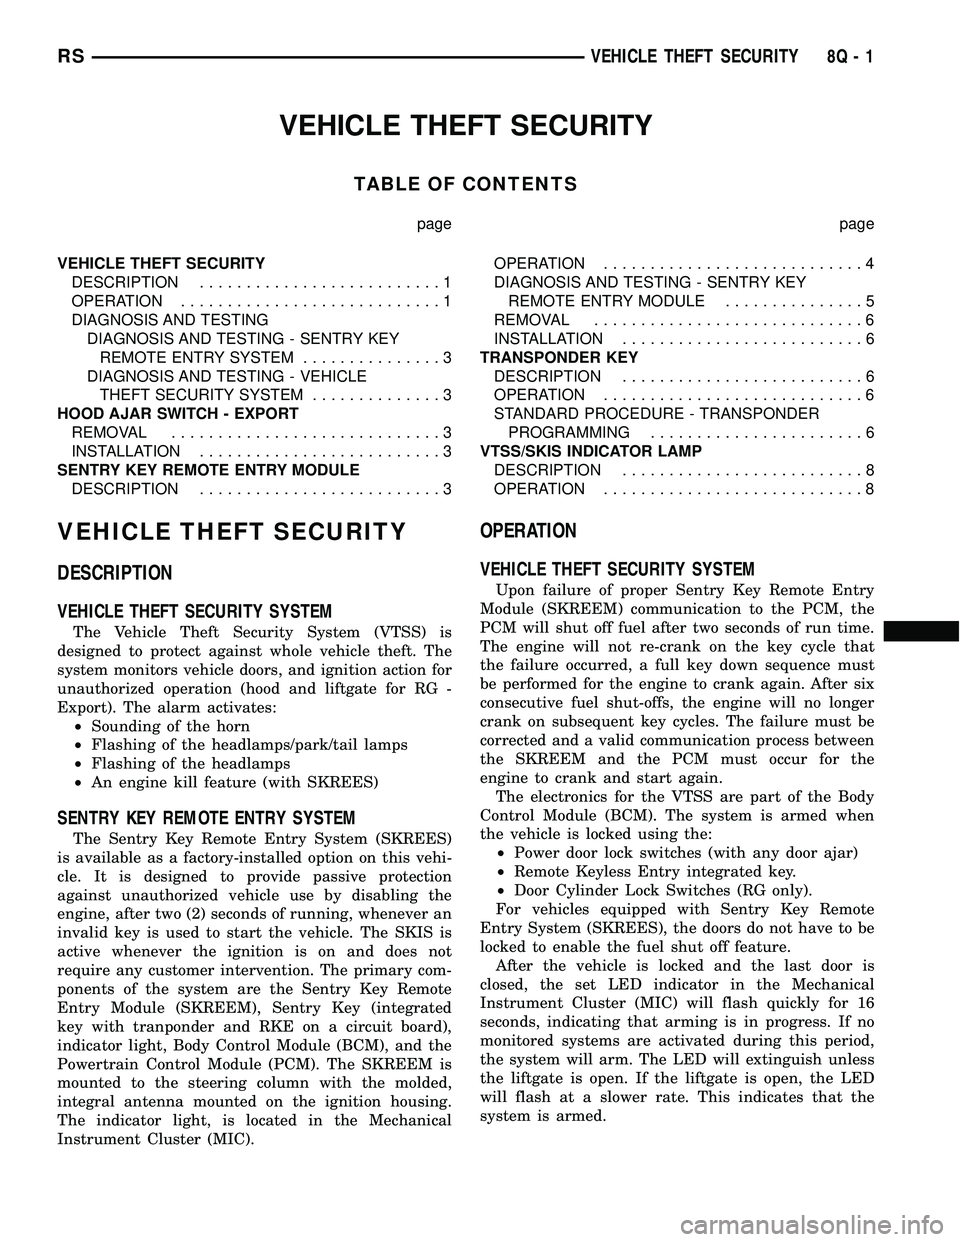 CHRYSLER VOYAGER 2005  Service Manual VEHICLE THEFT SECURITY
TABLE OF CONTENTS
page page
VEHICLE THEFT SECURITY
DESCRIPTION..........................1
OPERATION............................1
DIAGNOSIS AND TESTING
DIAGNOSIS AND TESTING - SE